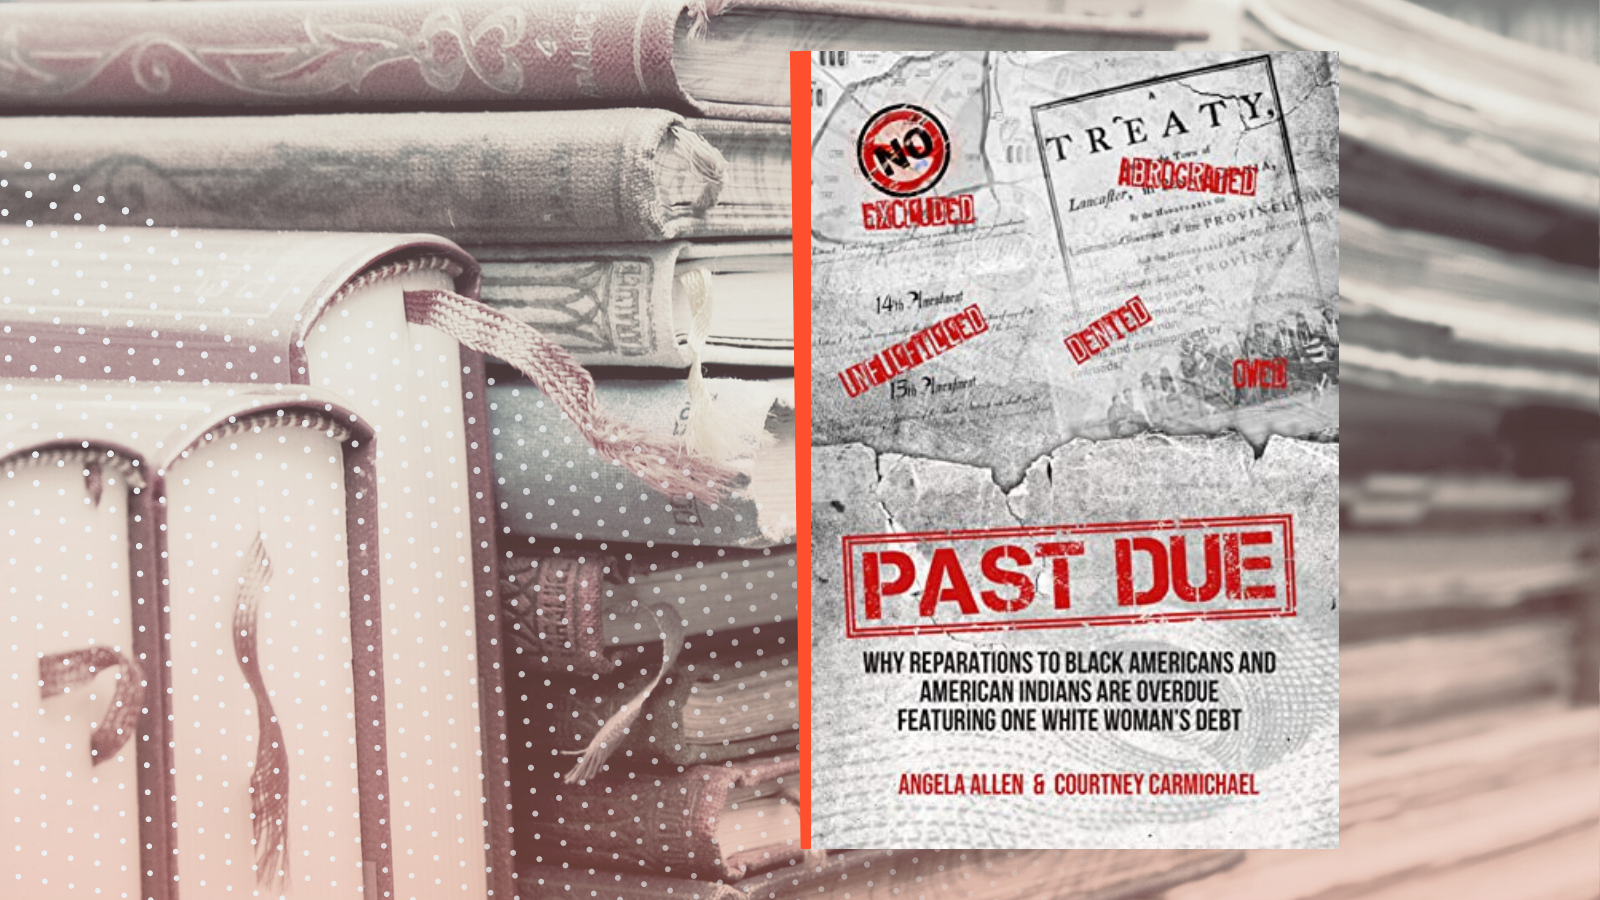 Past due is an important new book available for free download on Amazon.